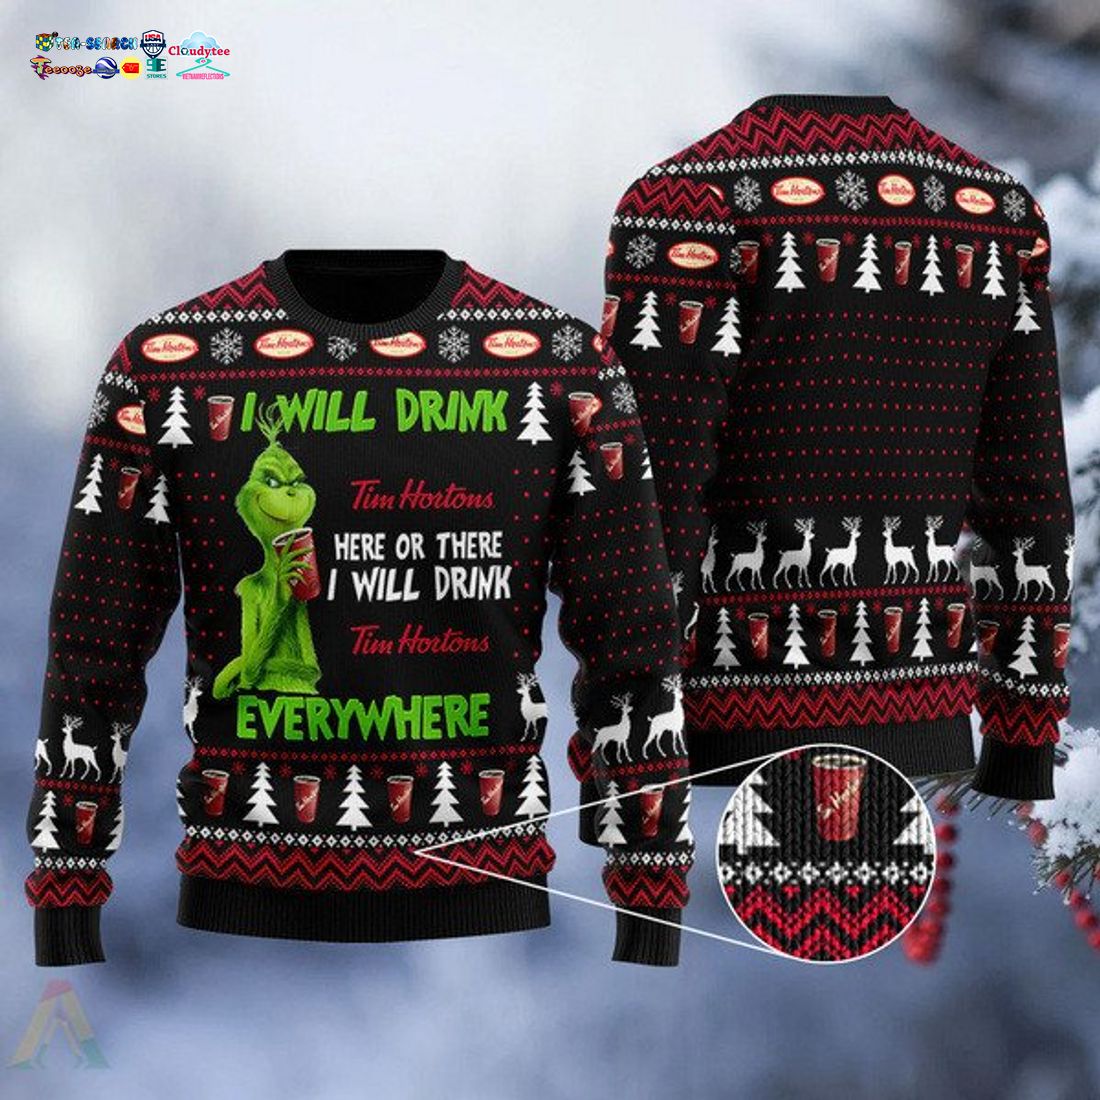 Grinch I Will Drink Tim Hortons Everywhere Ugly Christmas Sweater